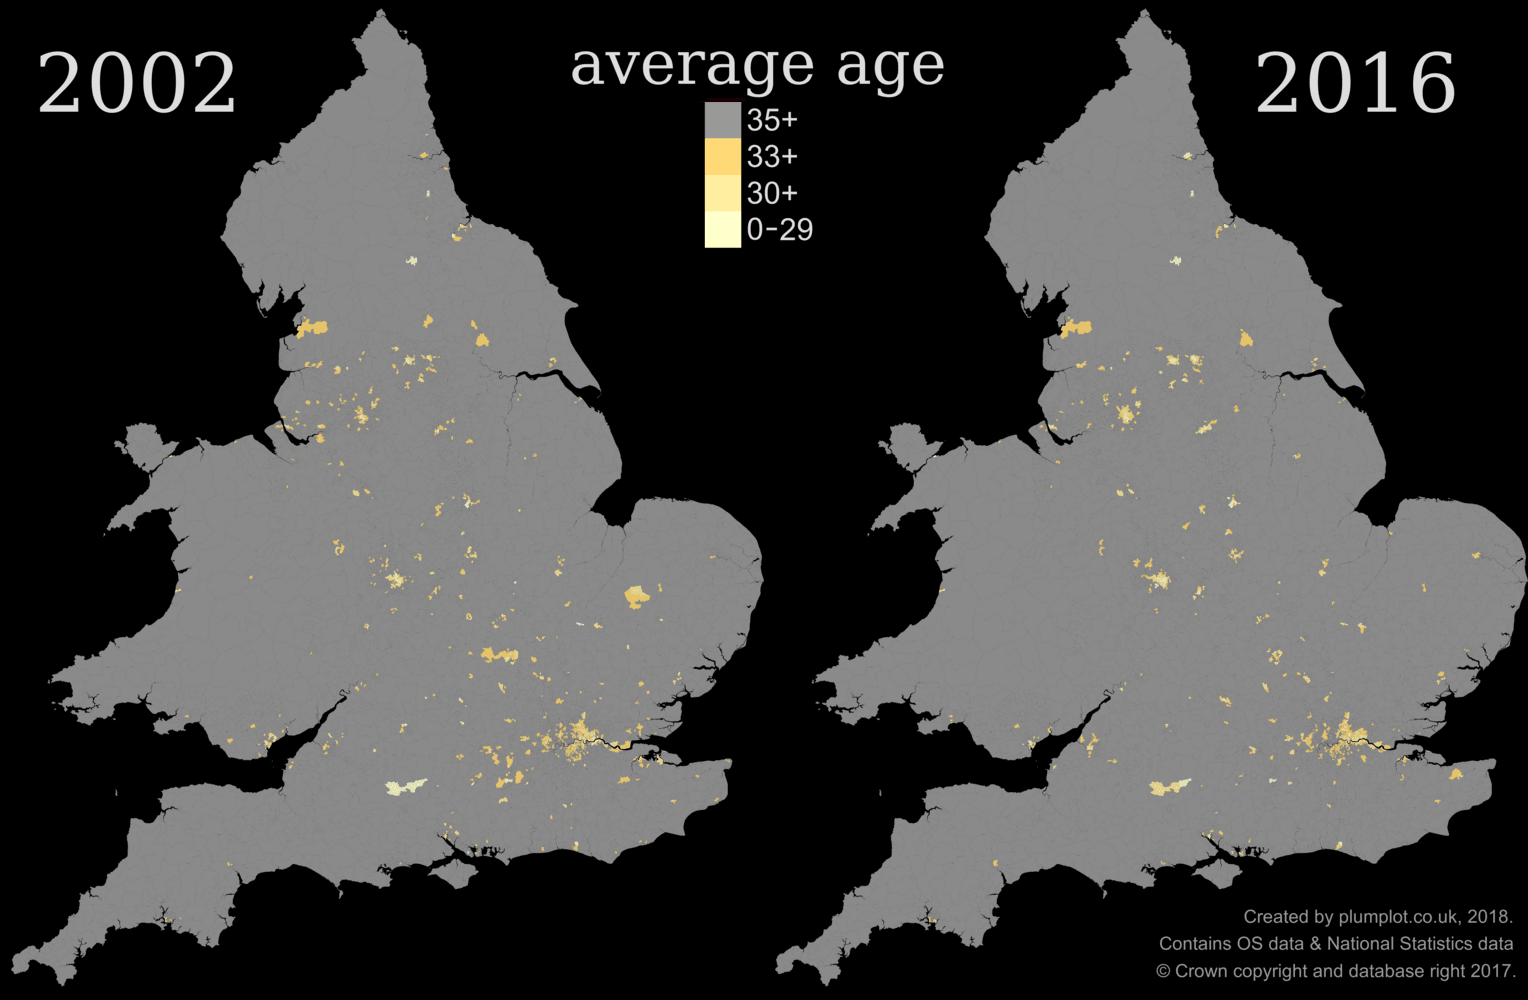 England areas with mean age below 35